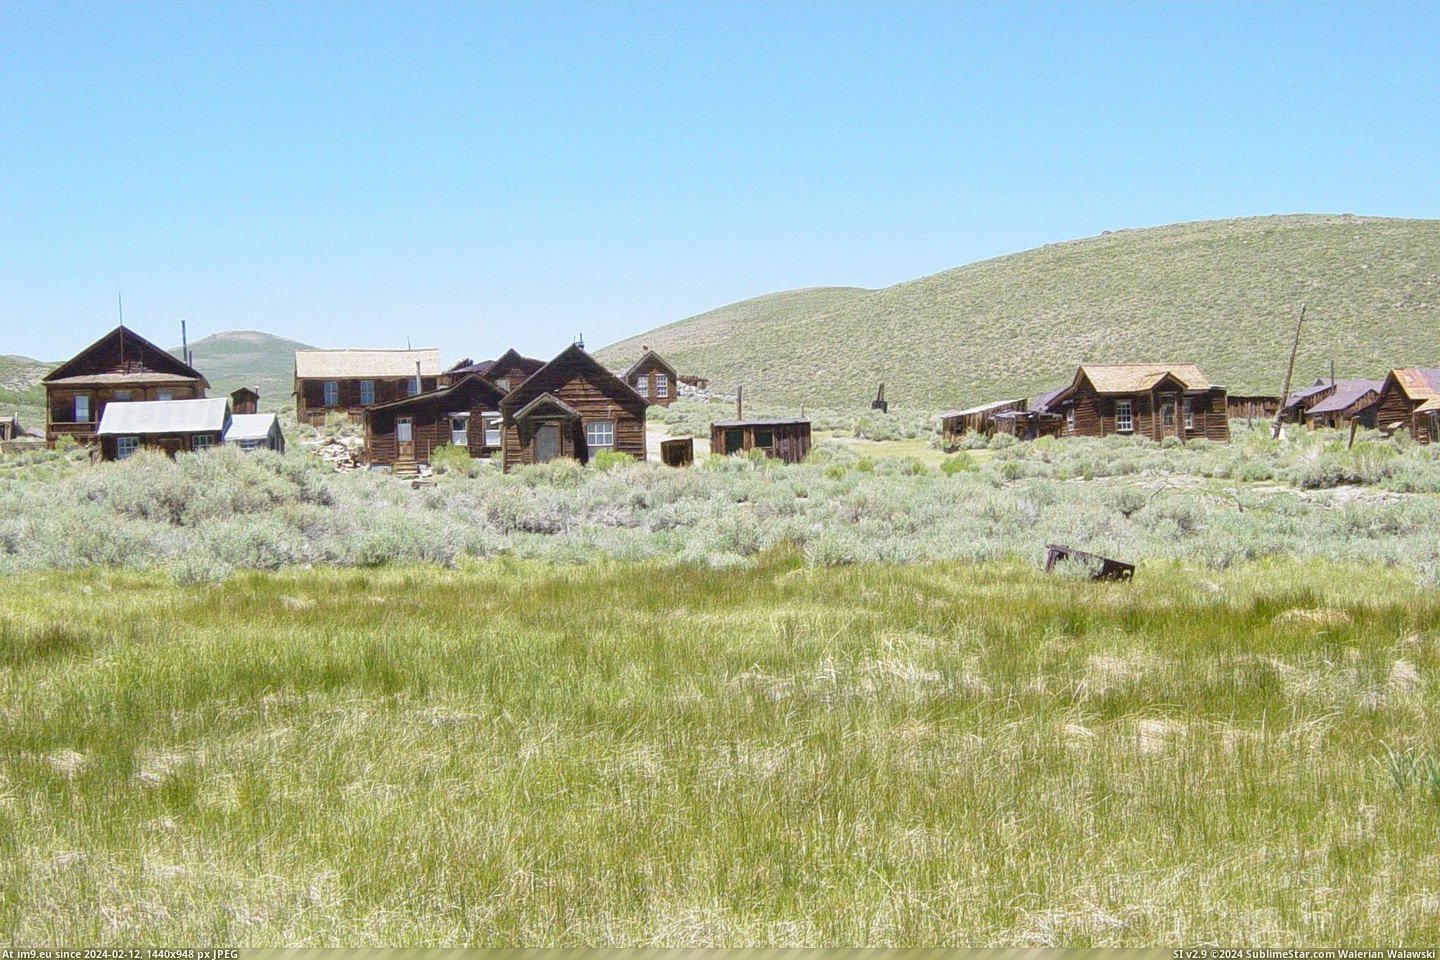 #California #Office #Assay #Sodderling #Site #Bodie Site Of Sodderling Assay Office In Bodie, California Pic. (Изображение из альбом Bodie - a ghost town in Eastern California))